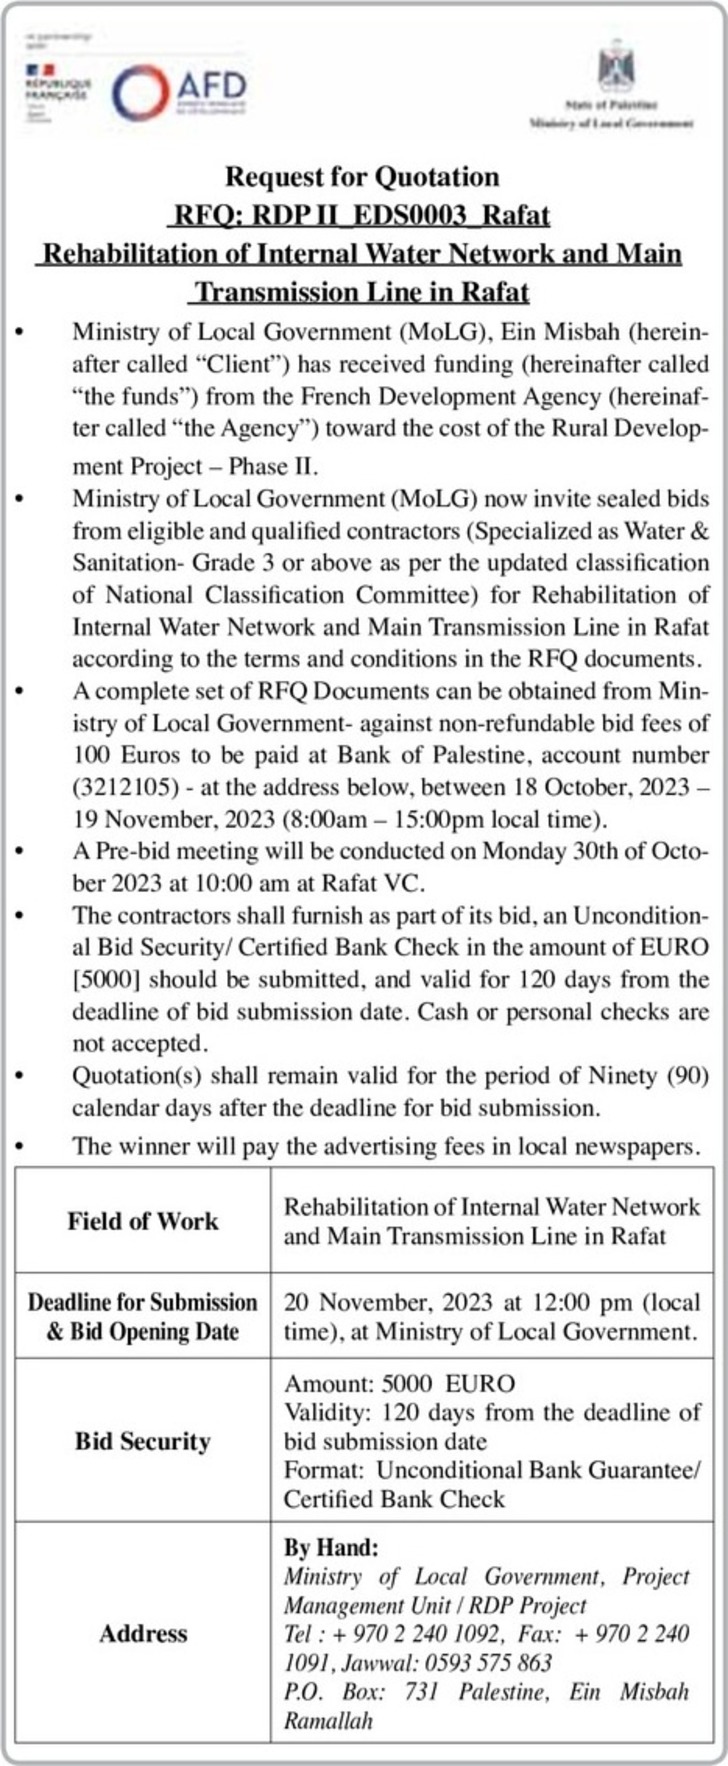  Rehabilitation of Internal Water Network and Main Transmission Line 